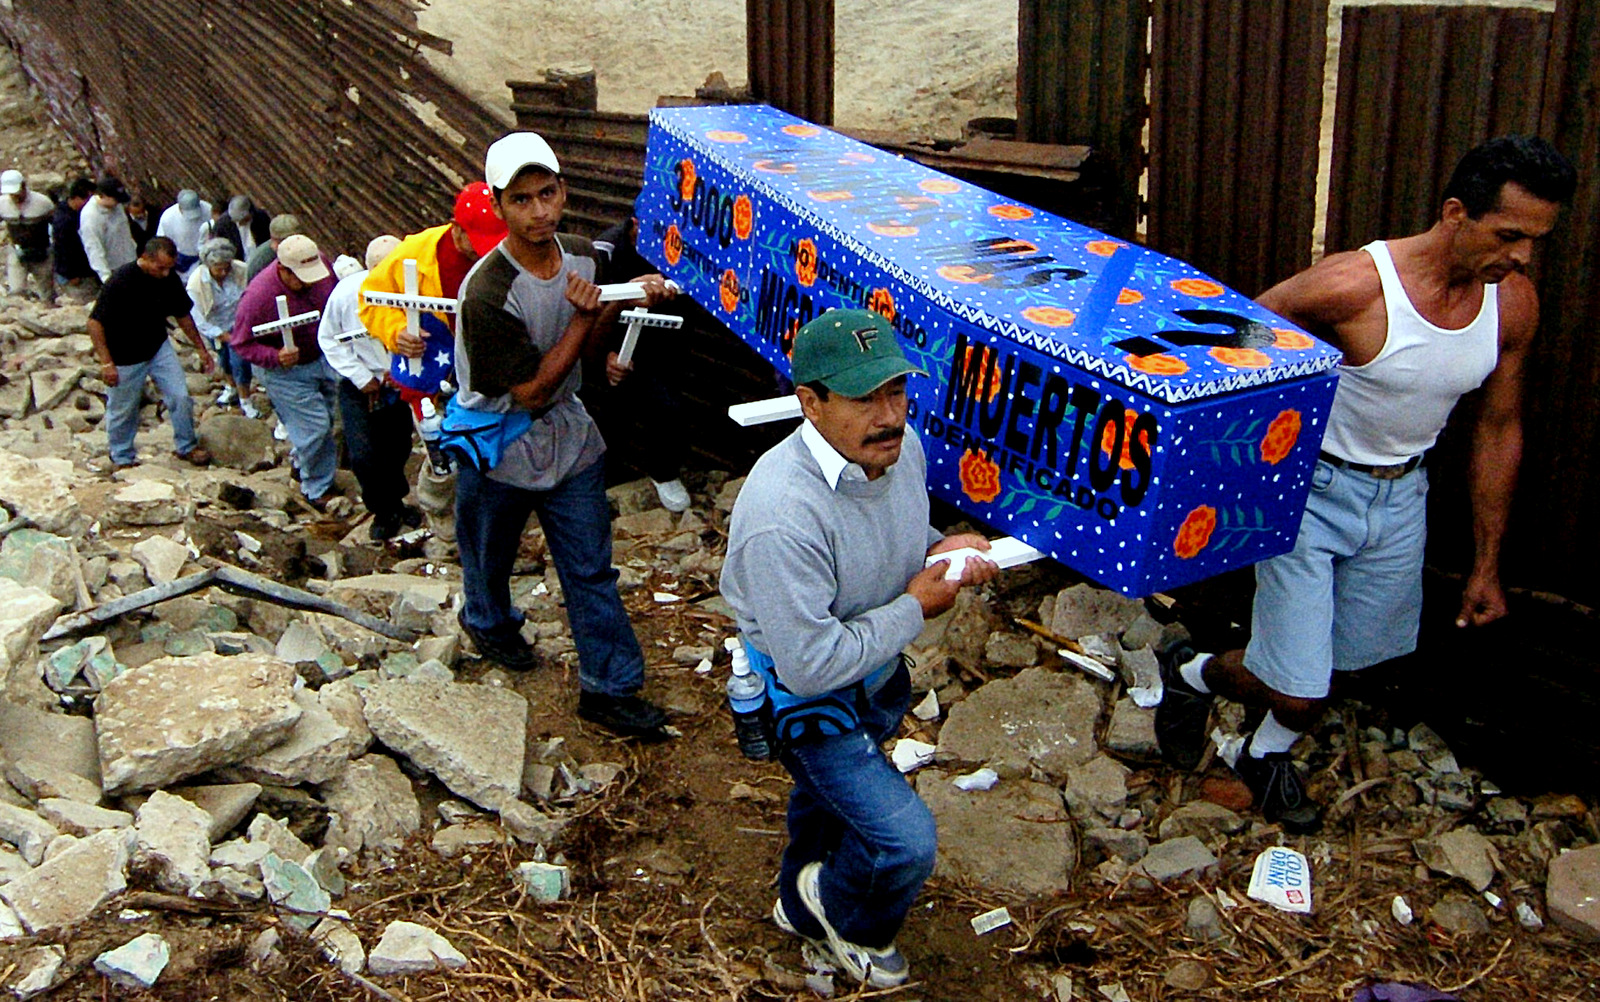 Marchers carry a casket along a section of the U.S.-Mexico border fence in Tijuana, Mexico Friday, Oct. 1, 2004, to mark the 10th anniversary of the U.S. border enforcement program Operation Gatekeeper. (AP/Denis Poroy)